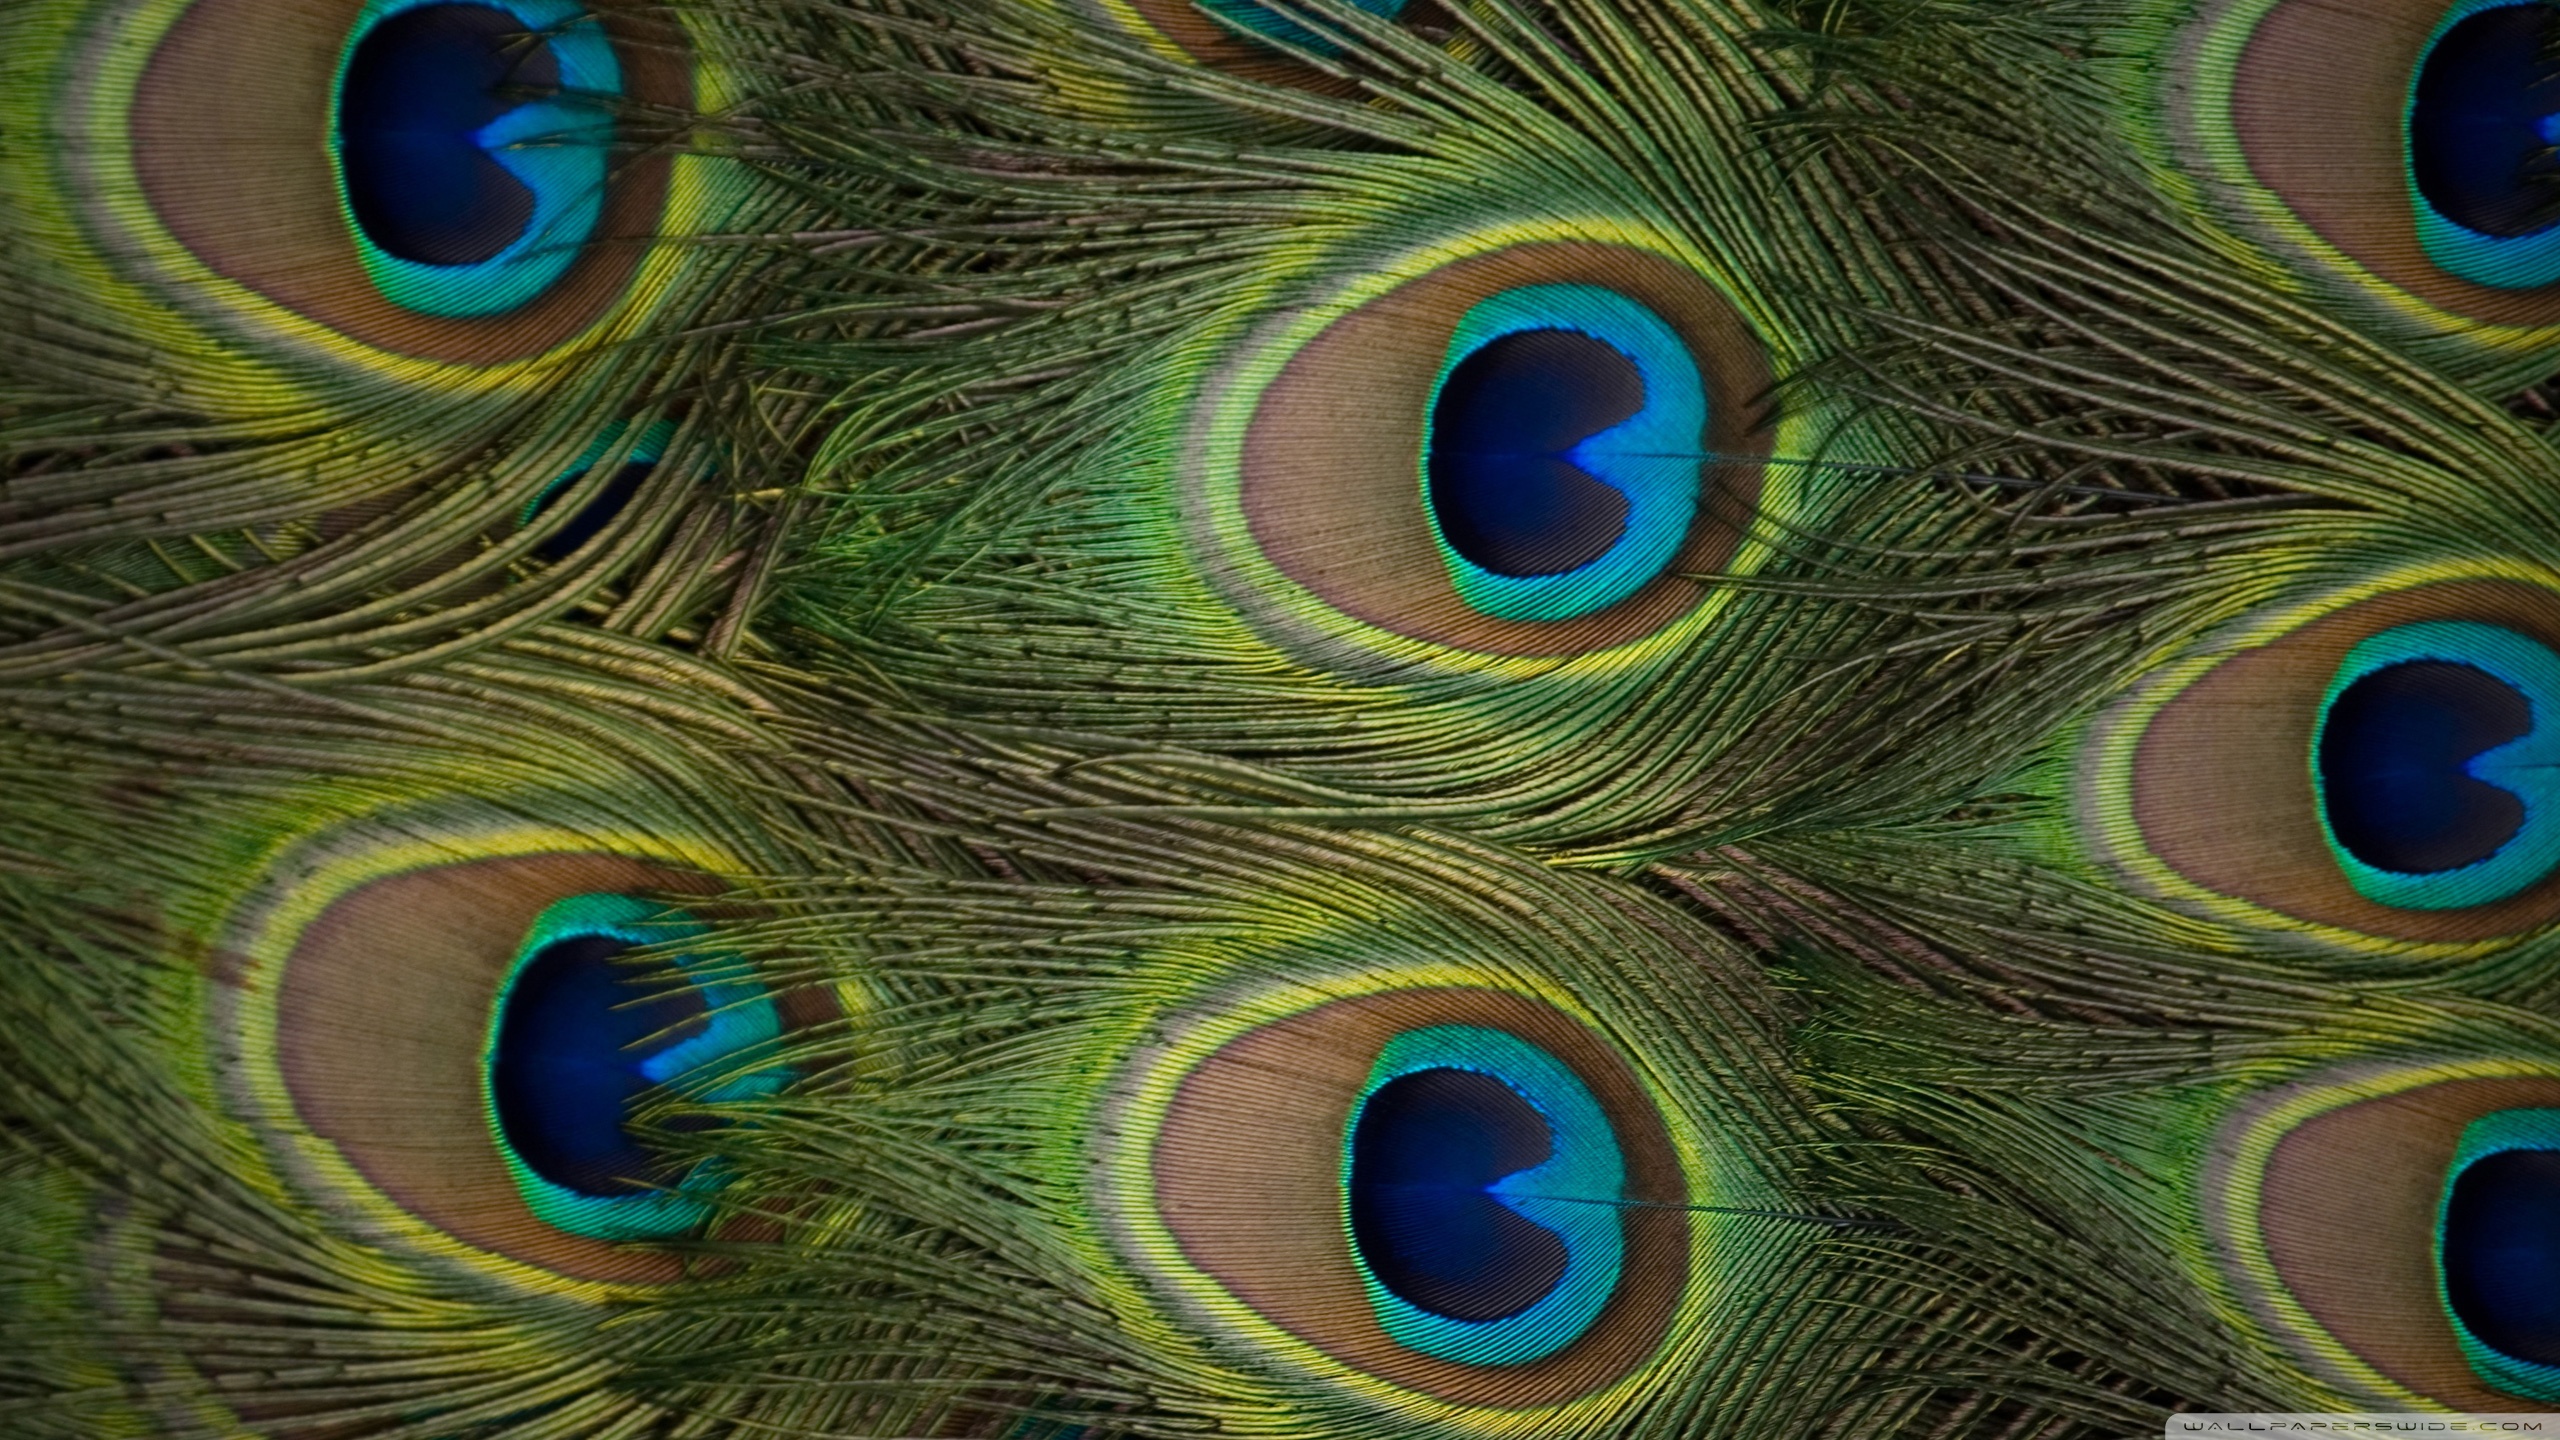 Peacock Hd Wallpaper - Peacock Feathers Hd , HD Wallpaper & Backgrounds